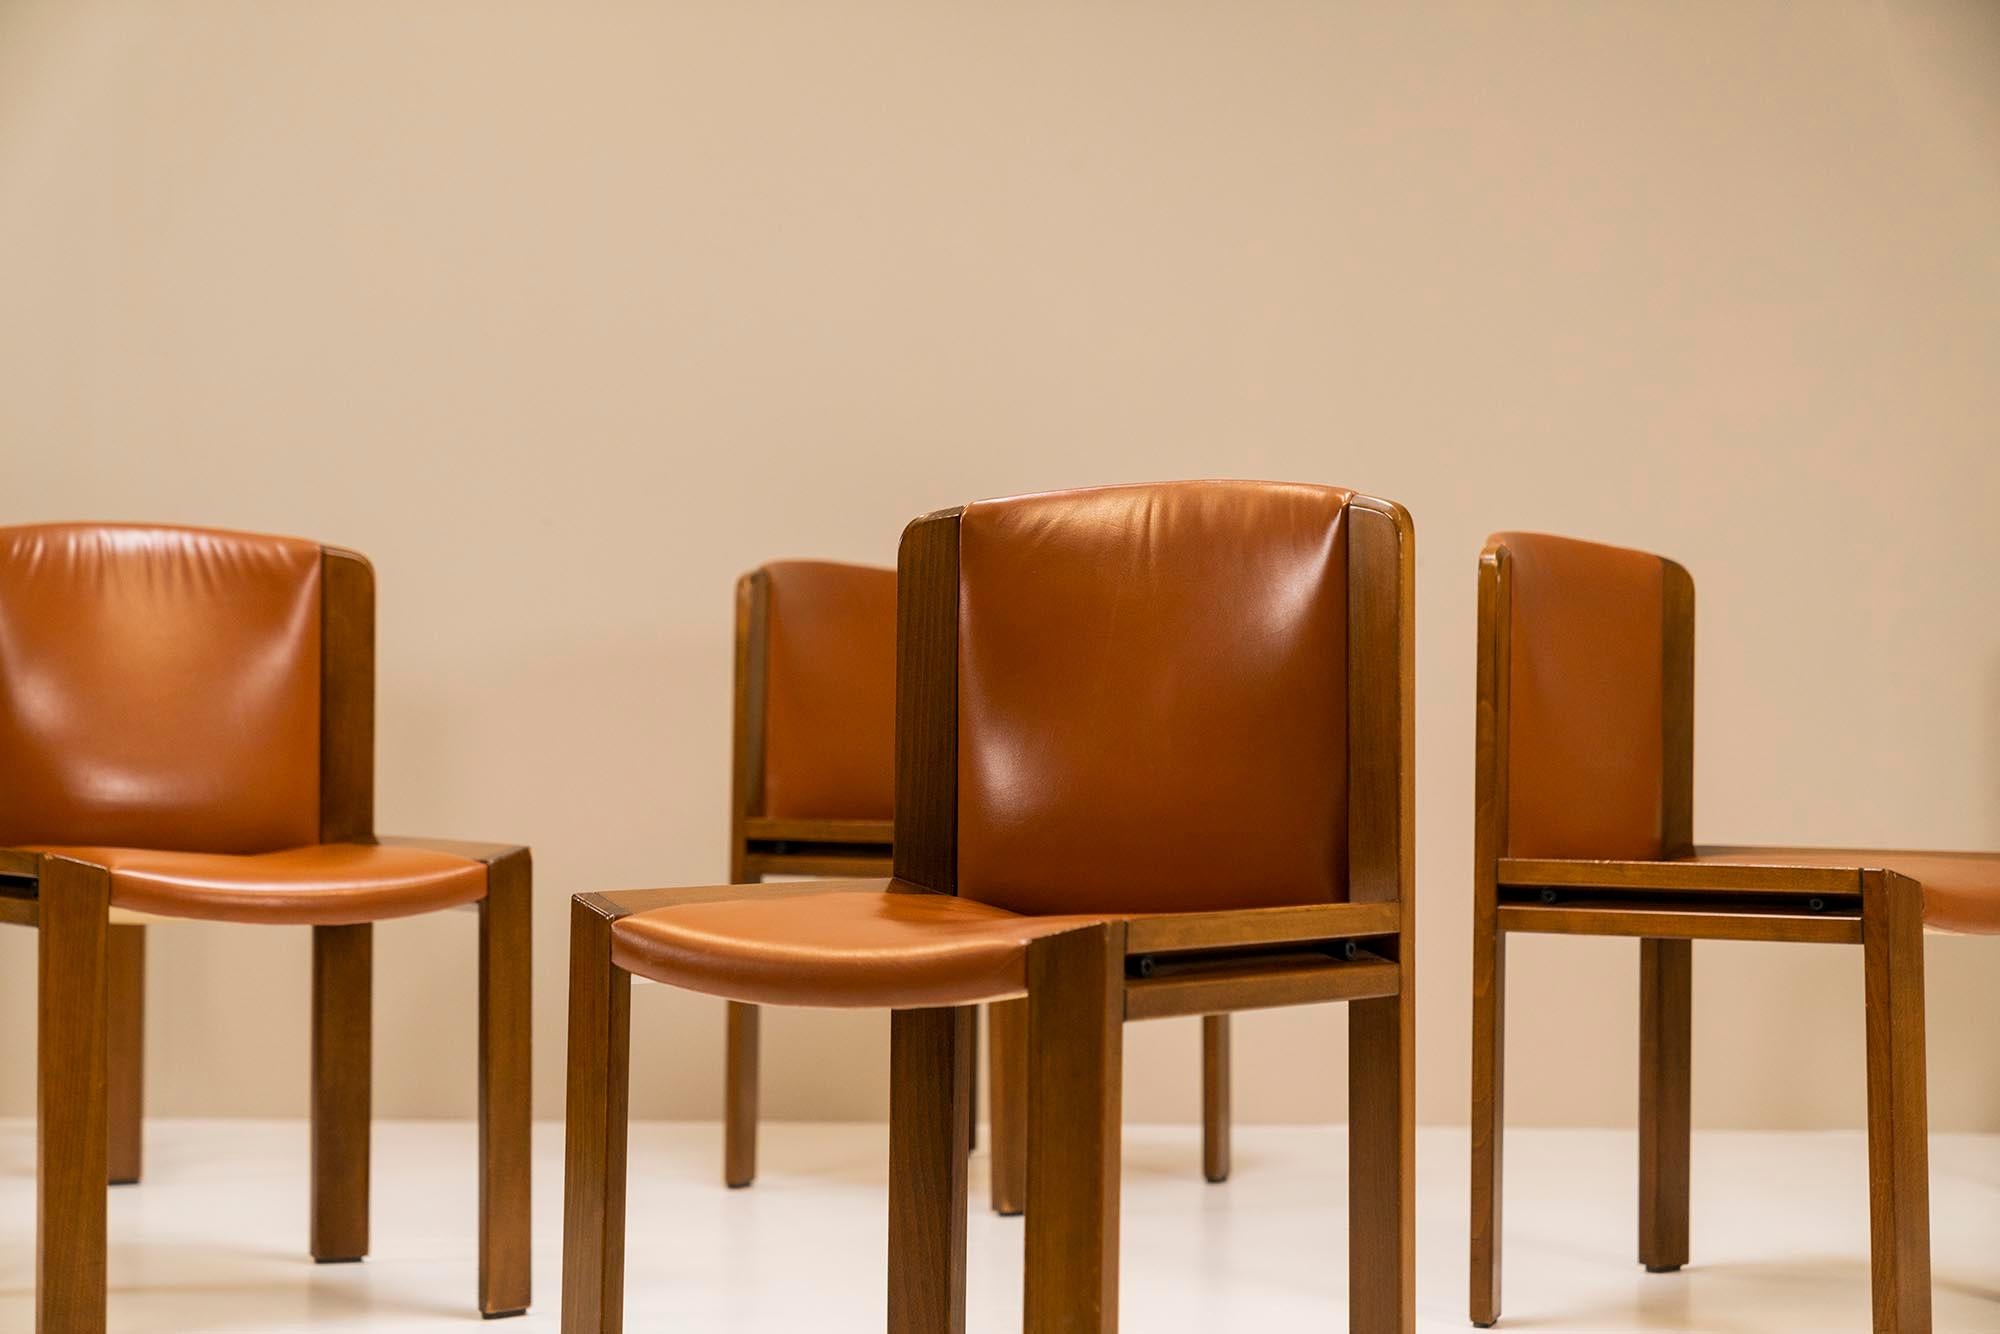 Mid-20th Century Joe Colombo 'Model 300' Dining Chairs in Oak and Leather for Pozzi, Italy 1965 For Sale